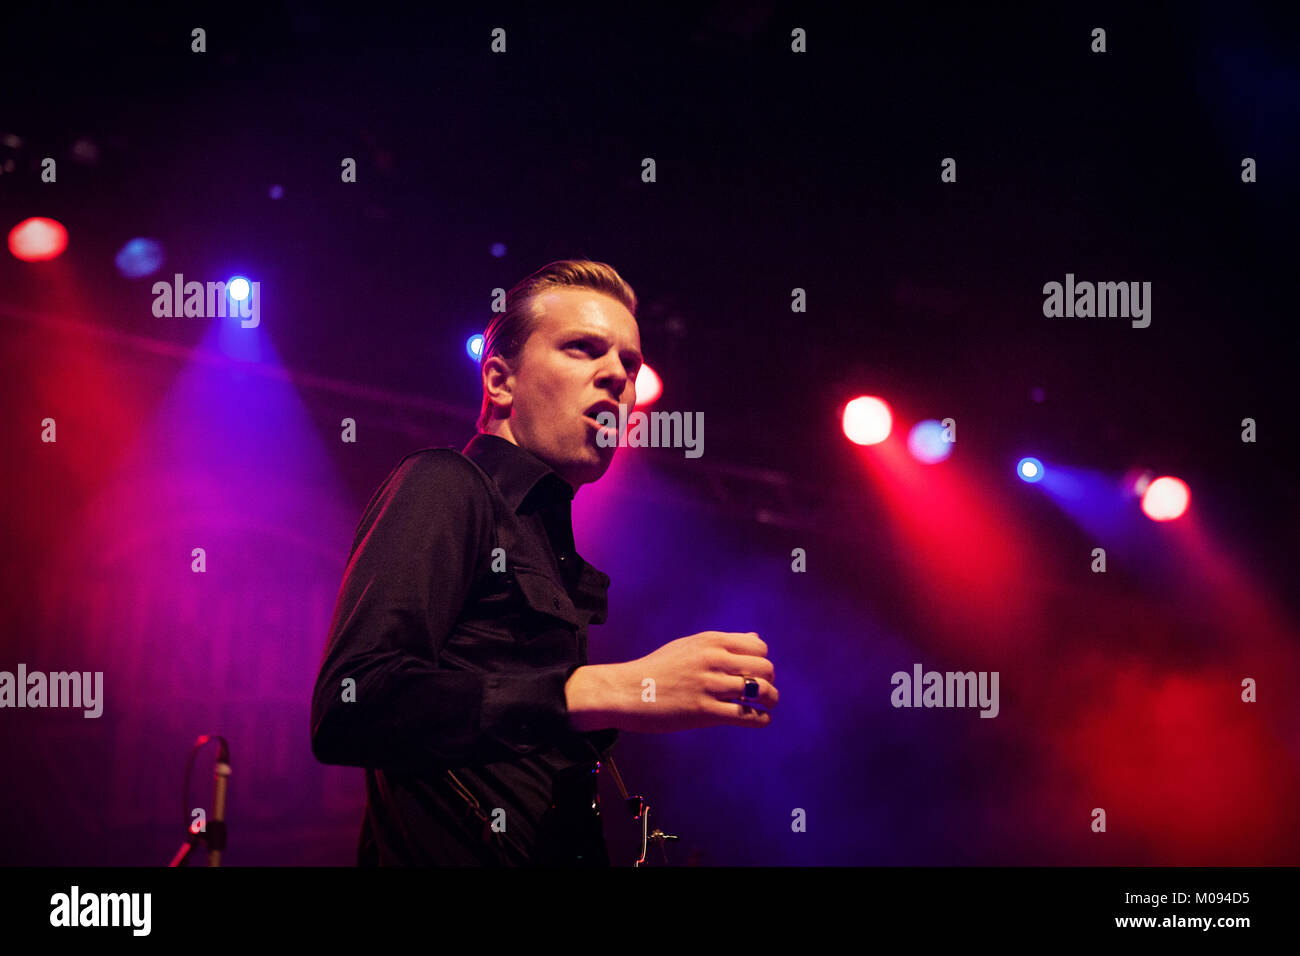 The Swedish rock band The Durango Riot performs a live concert at Das Freizeitzentrum West (FZW) in Dortmund as part of Visions 25th anniversary Club Edition at the Visions Festival 2014. Here singer and musician Fred Andersson is pictured live on stage. Germany, 05/10 2014. Stock Photo